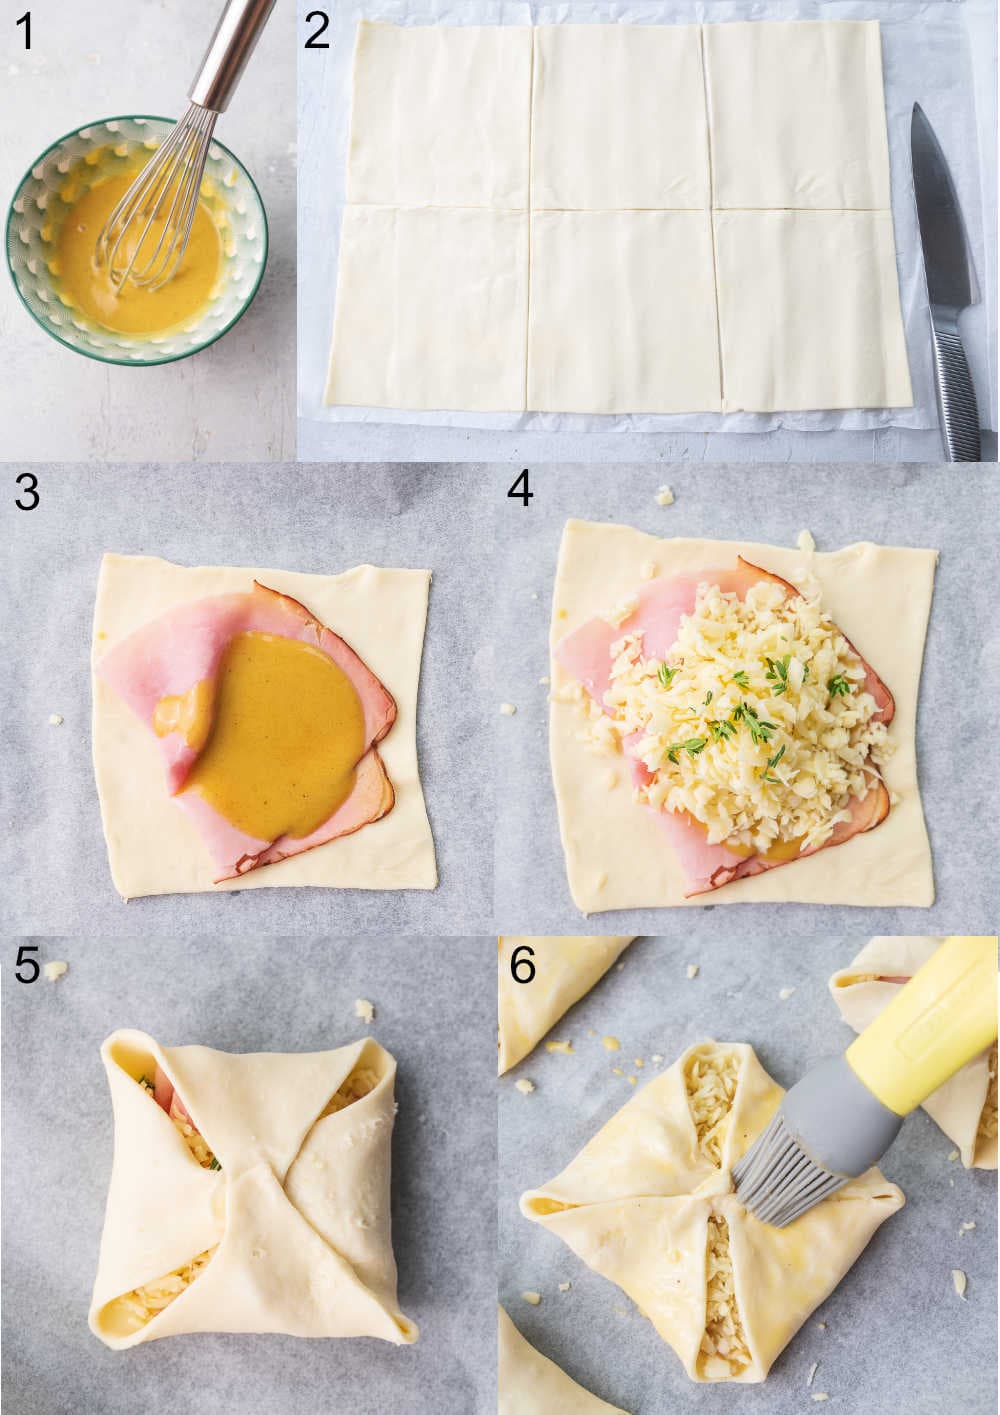 A collage of 6 photos showing how to make ham and cheese puff pastry pastries.